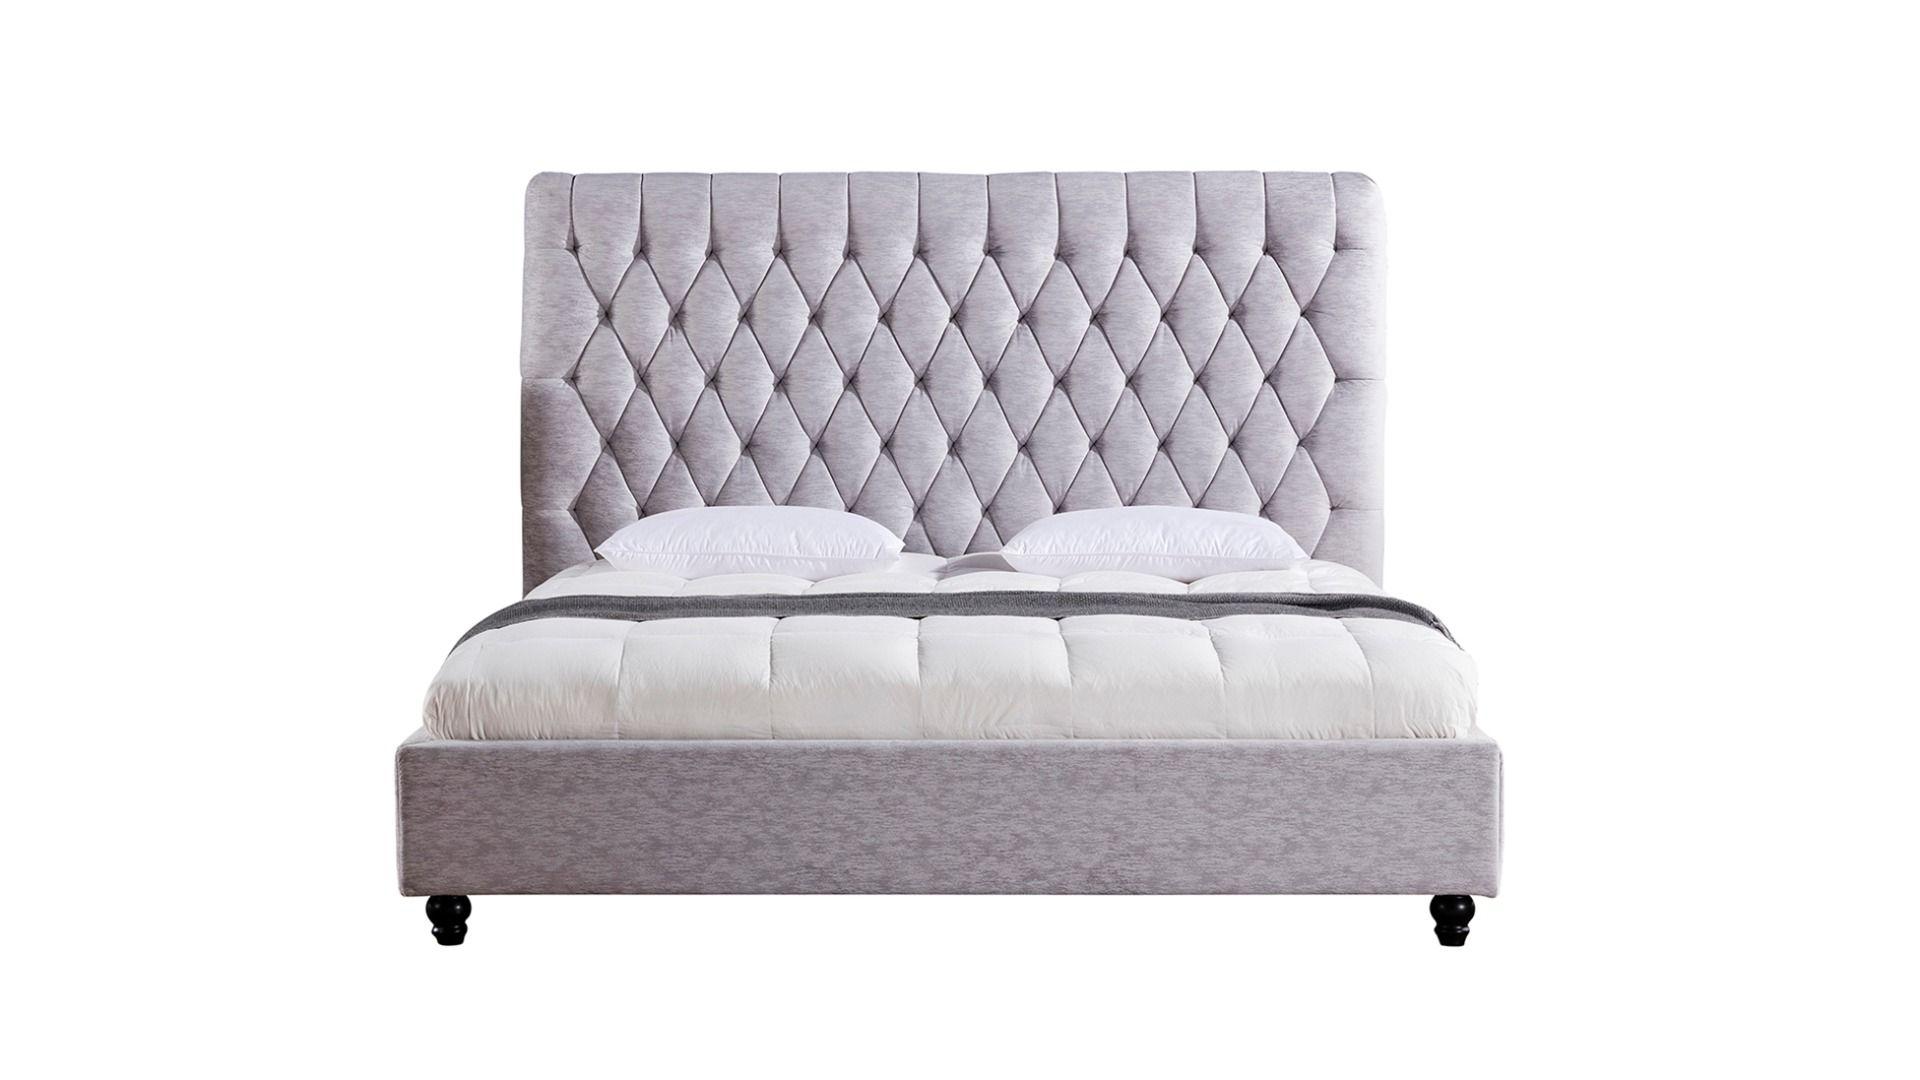 

    
Light Gray California King Size Bed Fabric Tufted Headboard American Eagle D060
